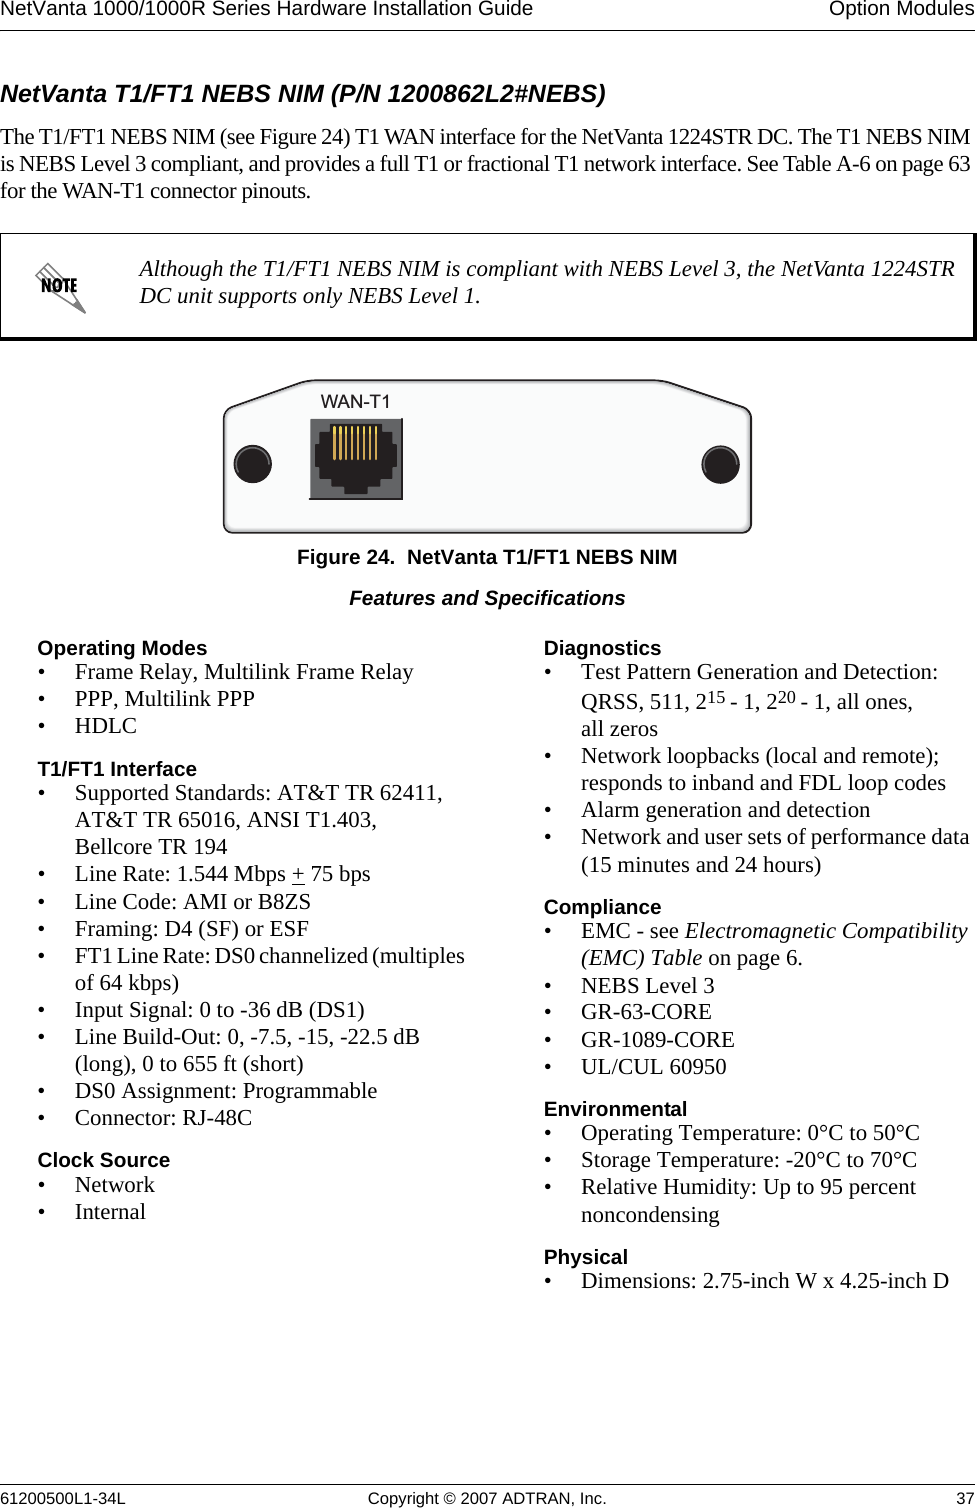 NetVanta 1000/1000R Series Hardware Installation Guide  Option Modules61200500L1-34L Copyright © 2007 ADTRAN, Inc. 37NetVanta T1/FT1 NEBS NIM (P/N 1200862L2#NEBS)The T1/FT1 NEBS NIM (see Figure 24) T1 WAN interface for the NetVanta 1224STR DC. The T1 NEBS NIM is NEBS Level 3 compliant, and provides a full T1 or fractional T1 network interface. See Table A-6 on page 63 for the WAN-T1 connector pinouts.Figure 24.  NetVanta T1/FT1 NEBS NIMAlthough the T1/FT1 NEBS NIM is compliant with NEBS Level 3, the NetVanta 1224STR DC unit supports only NEBS Level 1.WAN-T1Features and SpecificationsOperating Modes• Frame Relay, Multilink Frame Relay• PPP, Multilink PPP• HDLCT1/FT1 Interface• Supported Standards: AT&amp;T TR 62411, AT&amp;T TR 65016, ANSI T1.403, Bellcore TR 194• Line Rate: 1.544 Mbps + 75 bps• Line Code: AMI or B8ZS• Framing: D4 (SF) or ESF• FT1 Line Rate: DS0 channelized (multiples of 64 kbps)• Input Signal: 0 to -36 dB (DS1)• Line Build-Out: 0, -7.5, -15, -22.5 dB (long), 0 to 655 ft (short)• DS0 Assignment: Programmable• Connector: RJ-48CClock Source •Network•InternalDiagnostics• Test Pattern Generation and Detection: QRSS, 511, 215 - 1, 220 - 1, all ones, all zeros• Network loopbacks (local and remote); responds to inband and FDL loop codes • Alarm generation and detection• Network and user sets of performance data (15 minutes and 24 hours)Compliance• EMC - see Electromagnetic Compatibility (EMC) Table on page 6.• NEBS Level 3•GR-63-CORE• GR-1089-CORE• UL/CUL 60950Environmental• Operating Temperature: 0°C to 50°C• Storage Temperature: -20°C to 70°C• Relative Humidity: Up to 95 percent noncondensingPhysical• Dimensions: 2.75-inch W x 4.25-inch D